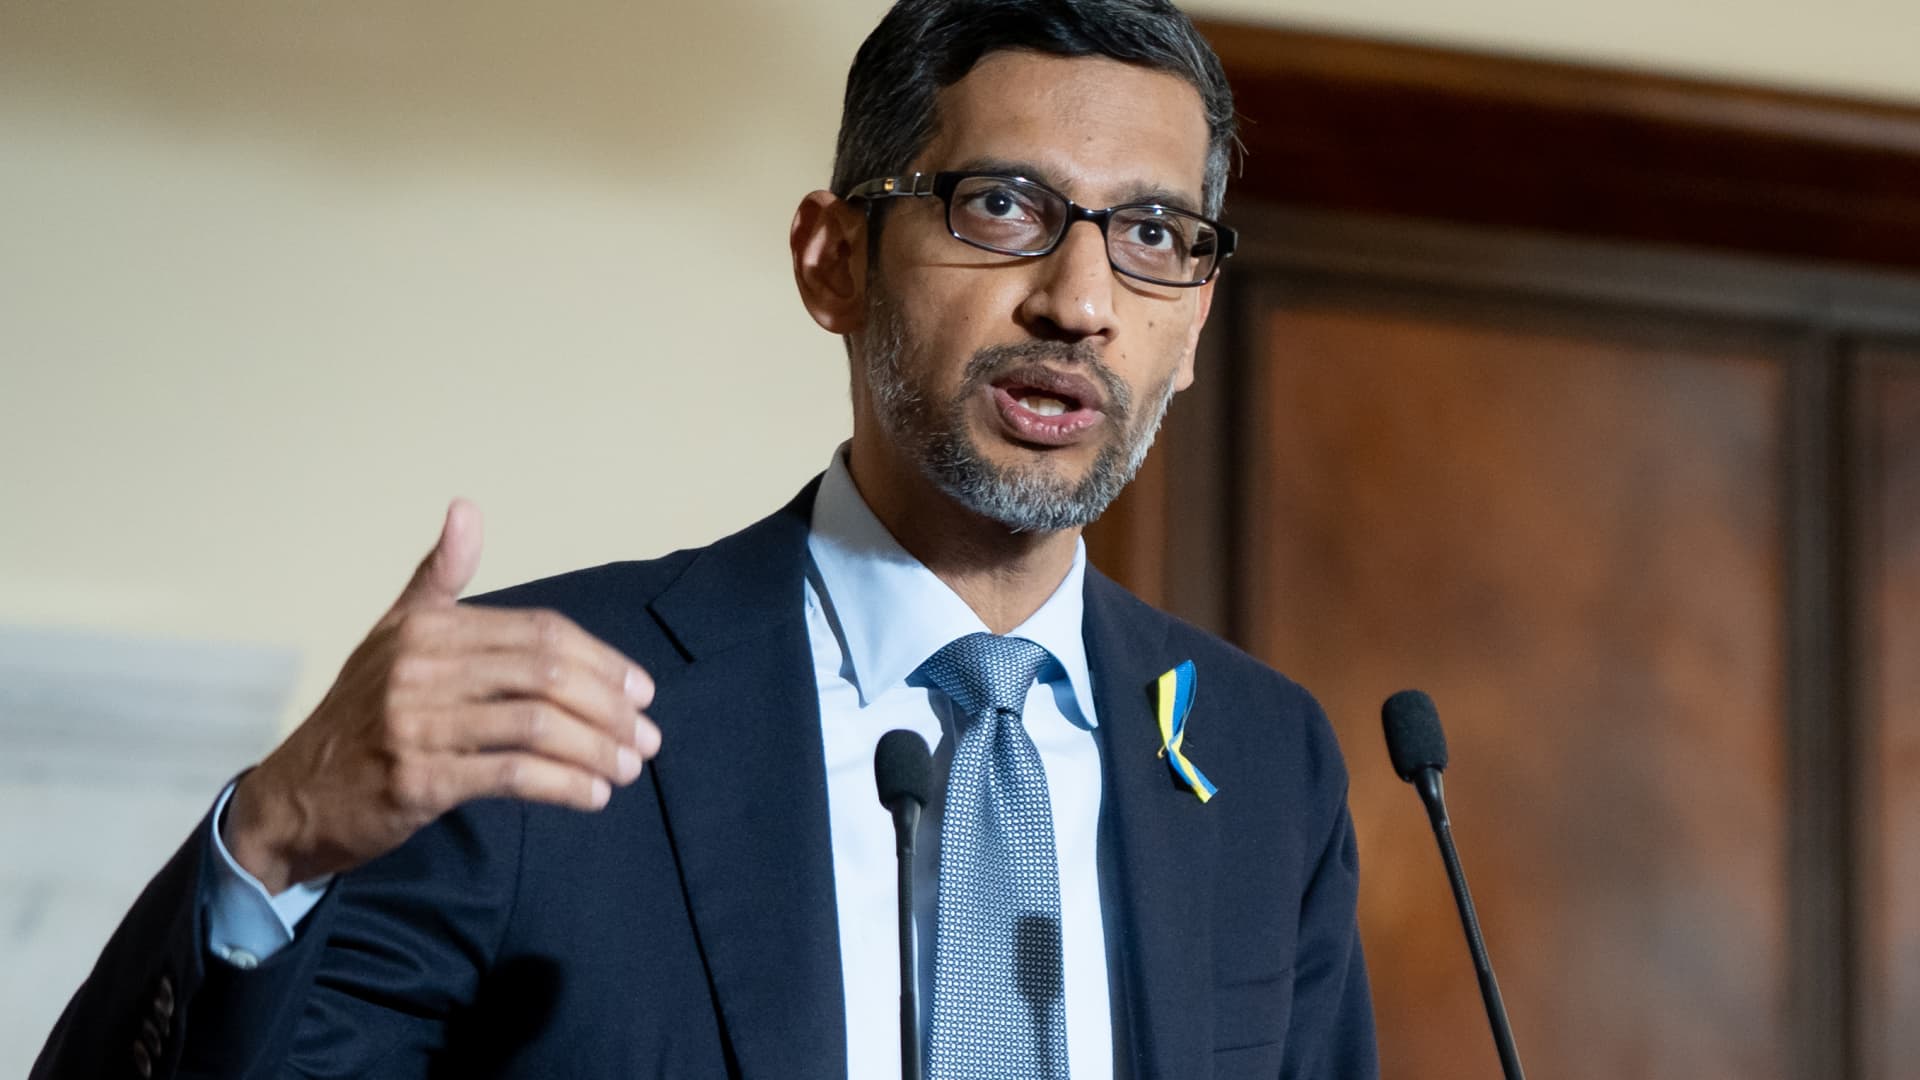 Google CEO says he hopes to make company 20% more efficient, hints at potential cuts